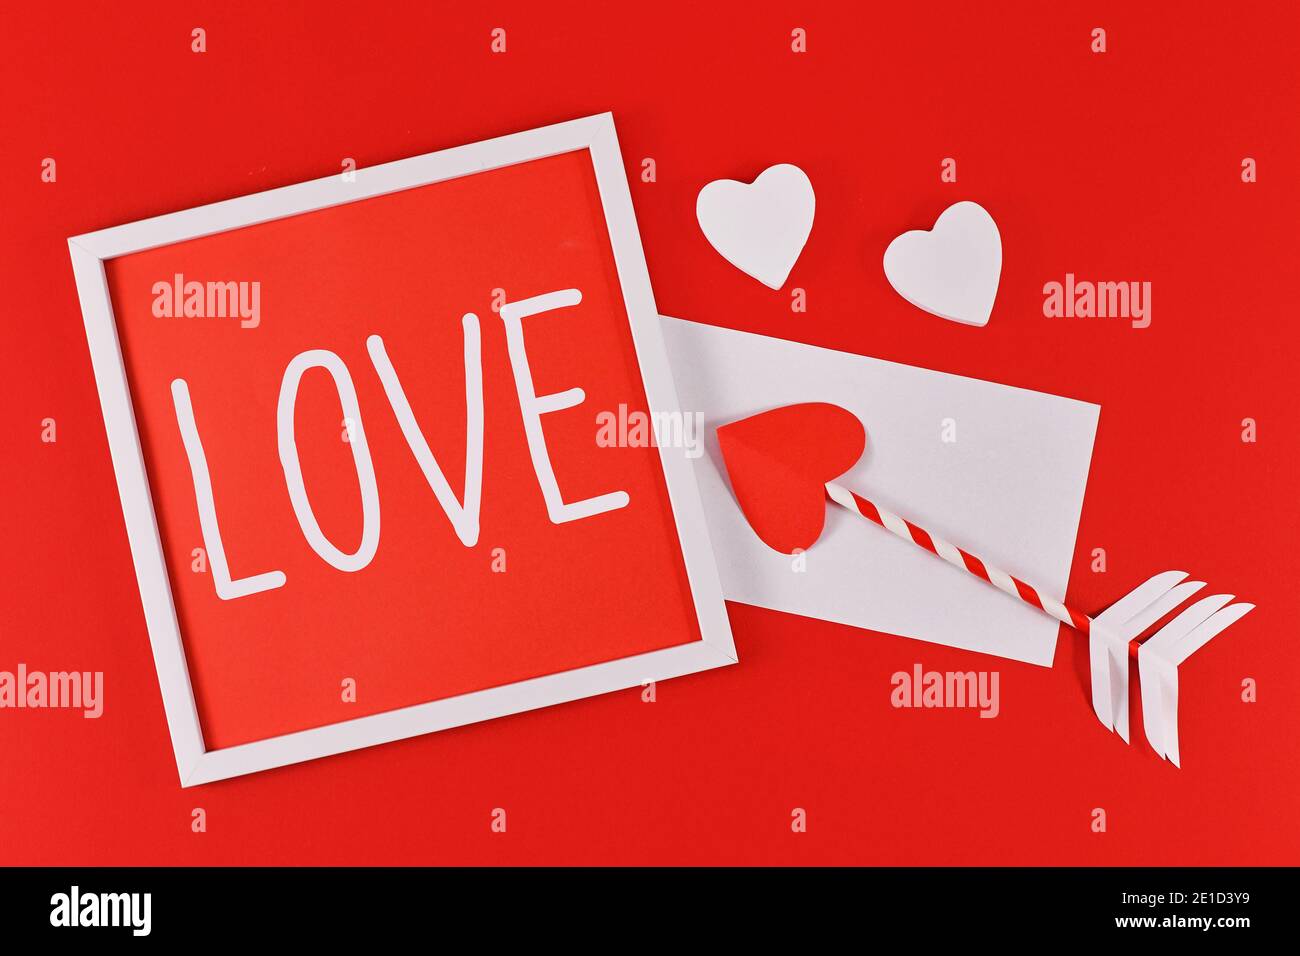 Valentine's Day composition with picture frame with text 'LOVE', cupid love arrows, letter, and hearts on red background Stock Photo